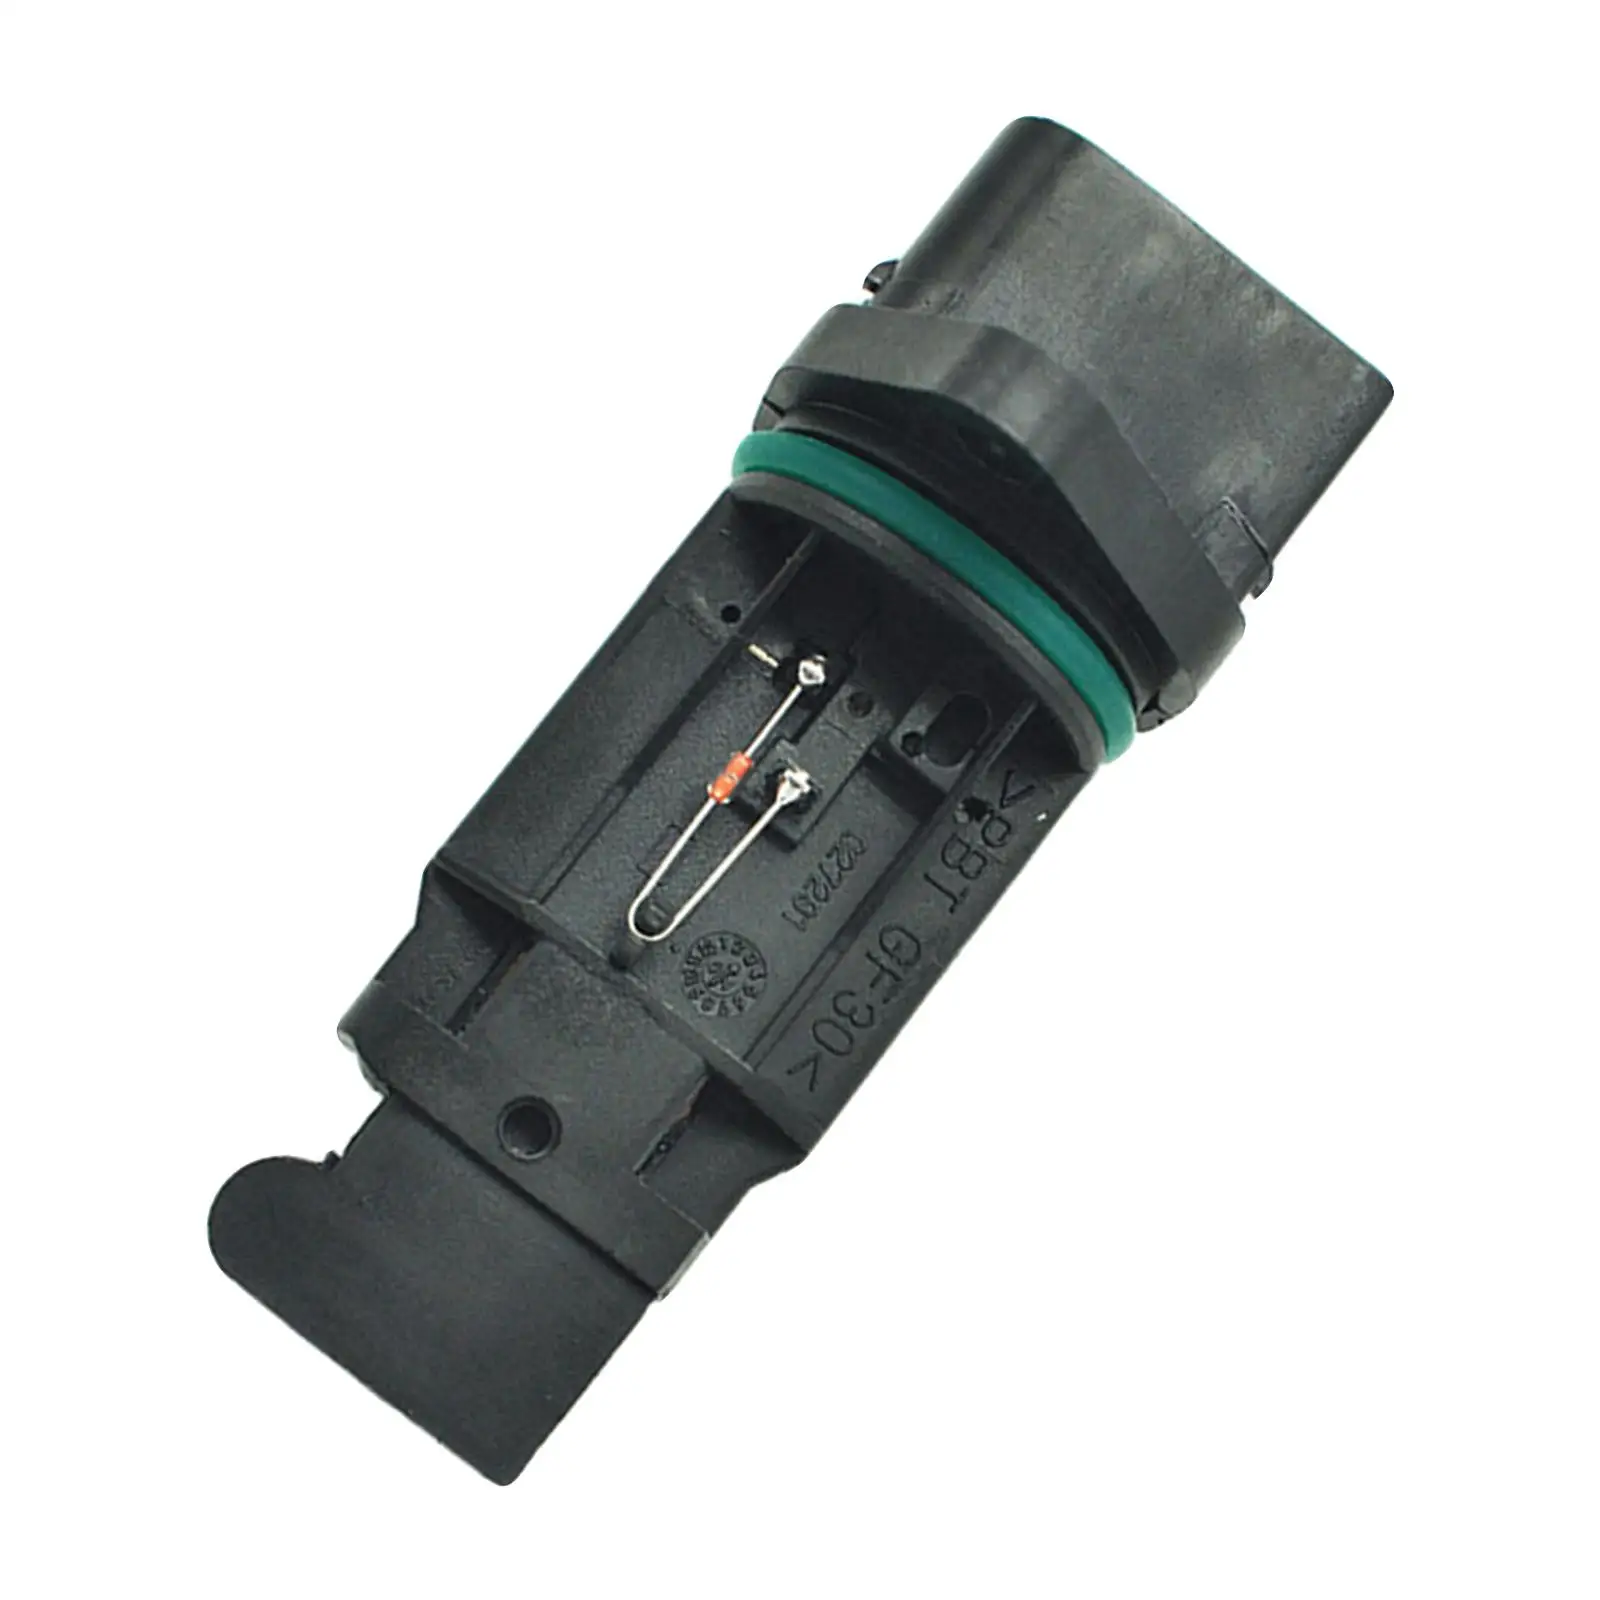 

Mass Air Flow Meter Maf Sensor Meter Vehicle Parts Black Assembly for 911 3.4 97-2001 0280217007 Easy Installation